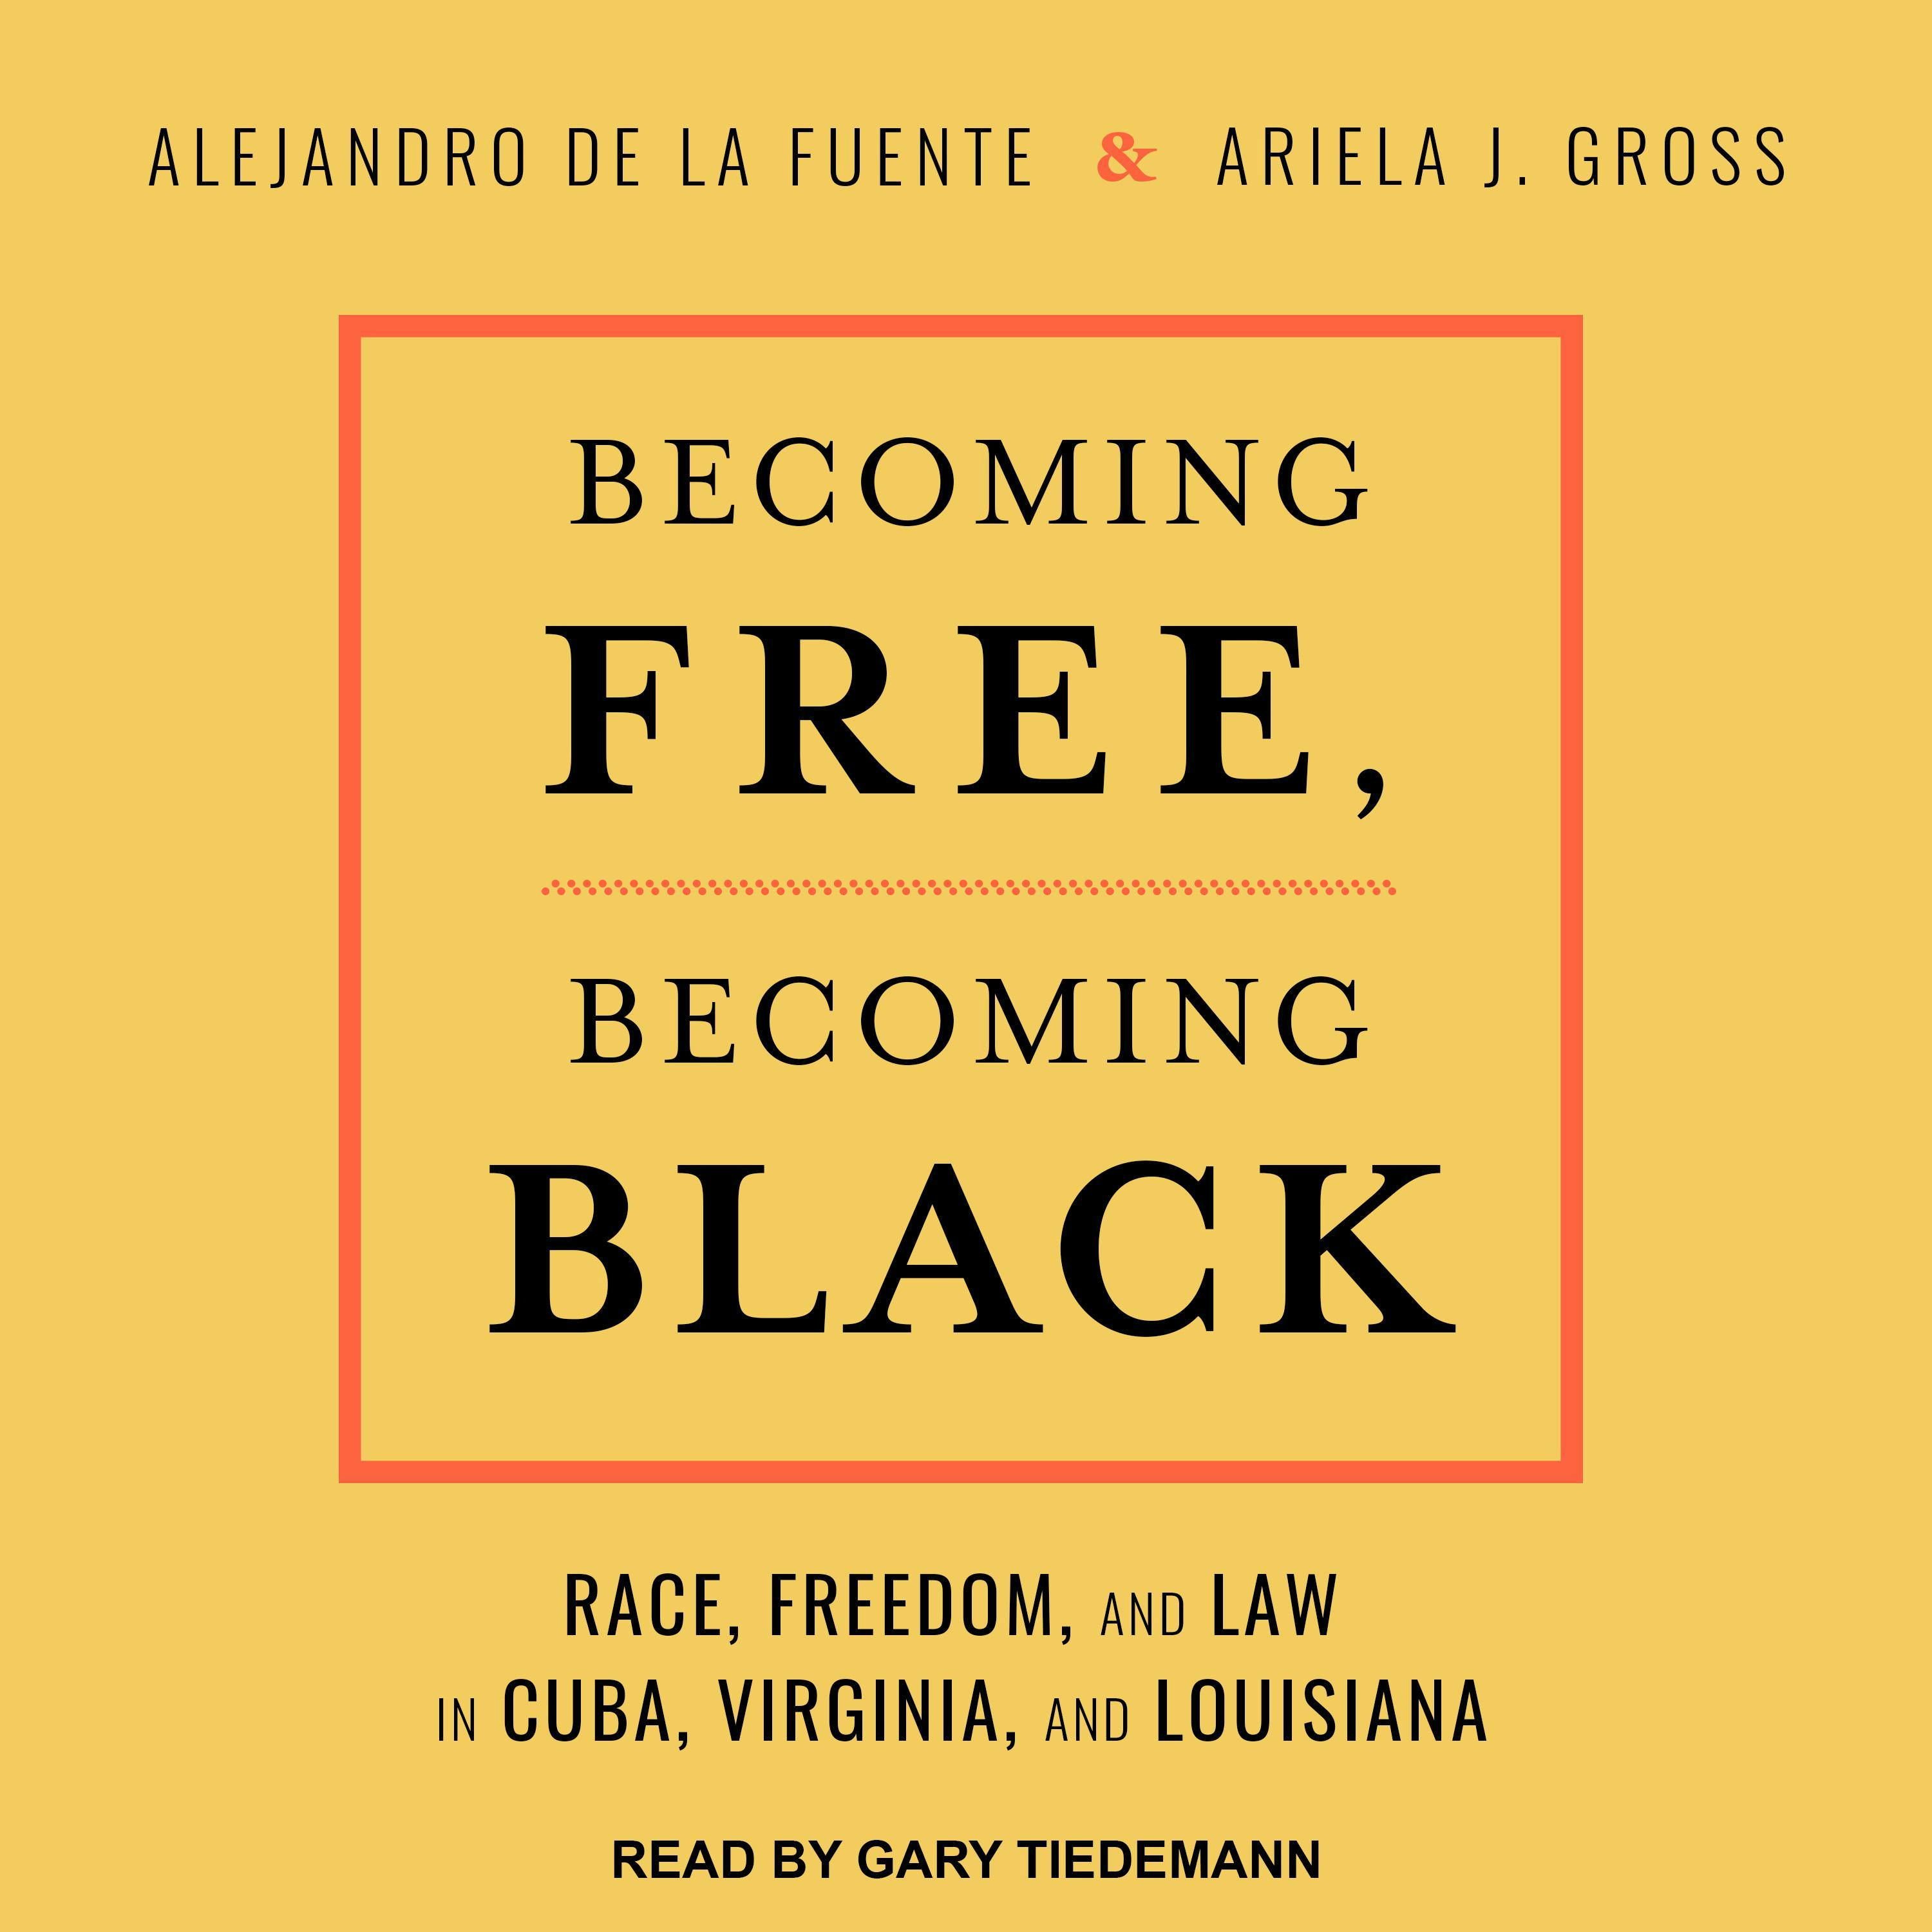 Becoming Free, Becoming Black: Race, Freedom, and Law in Cuba, Virginia, and Louisiana - Alejandro de la Fuente, Ariela J. Gross